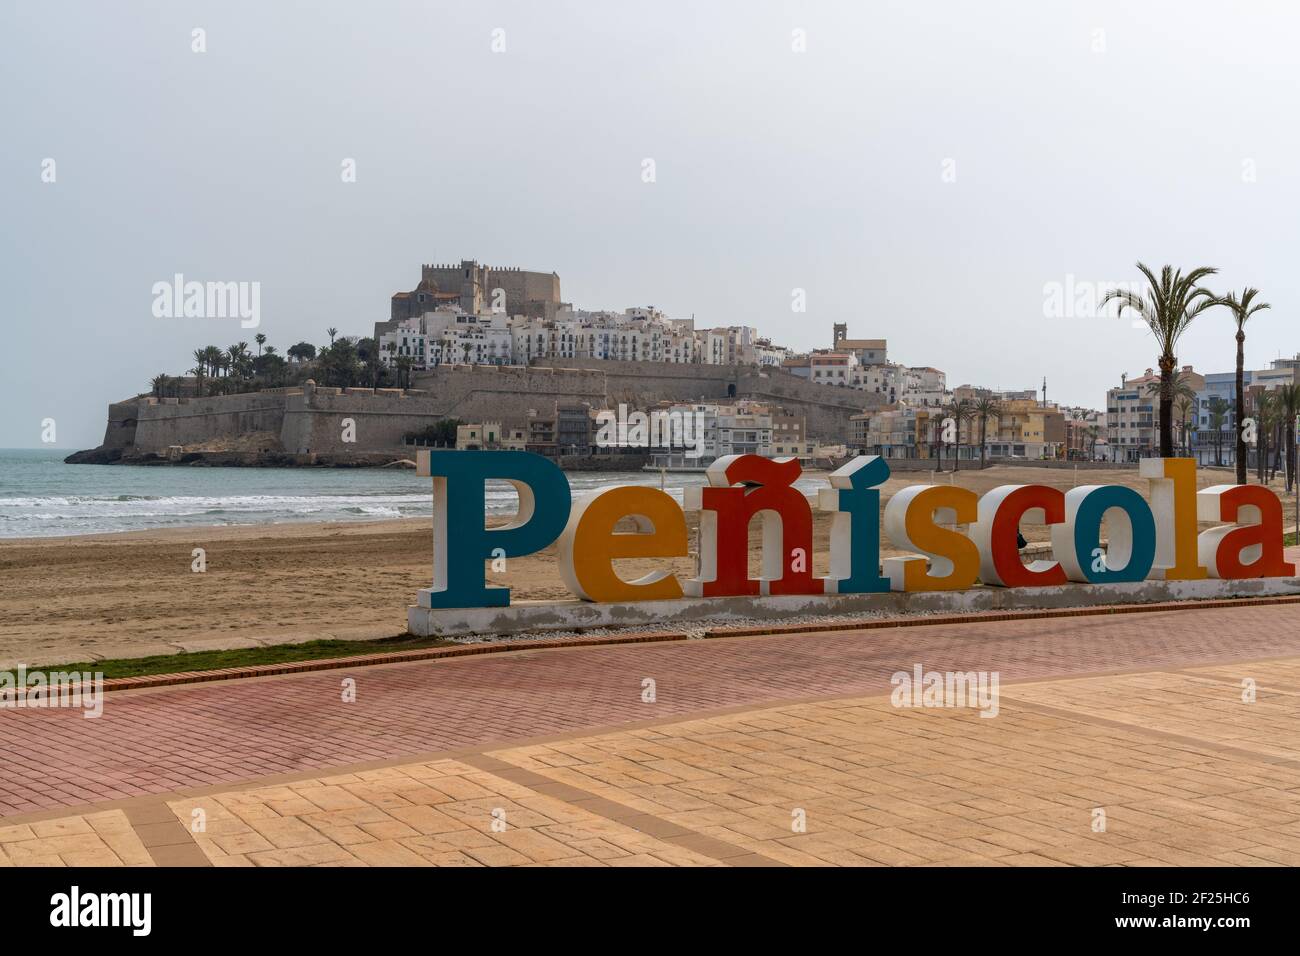 A view of the town sign and beach of Peniscola on the Costa del Azahar in Spain Stock Photo